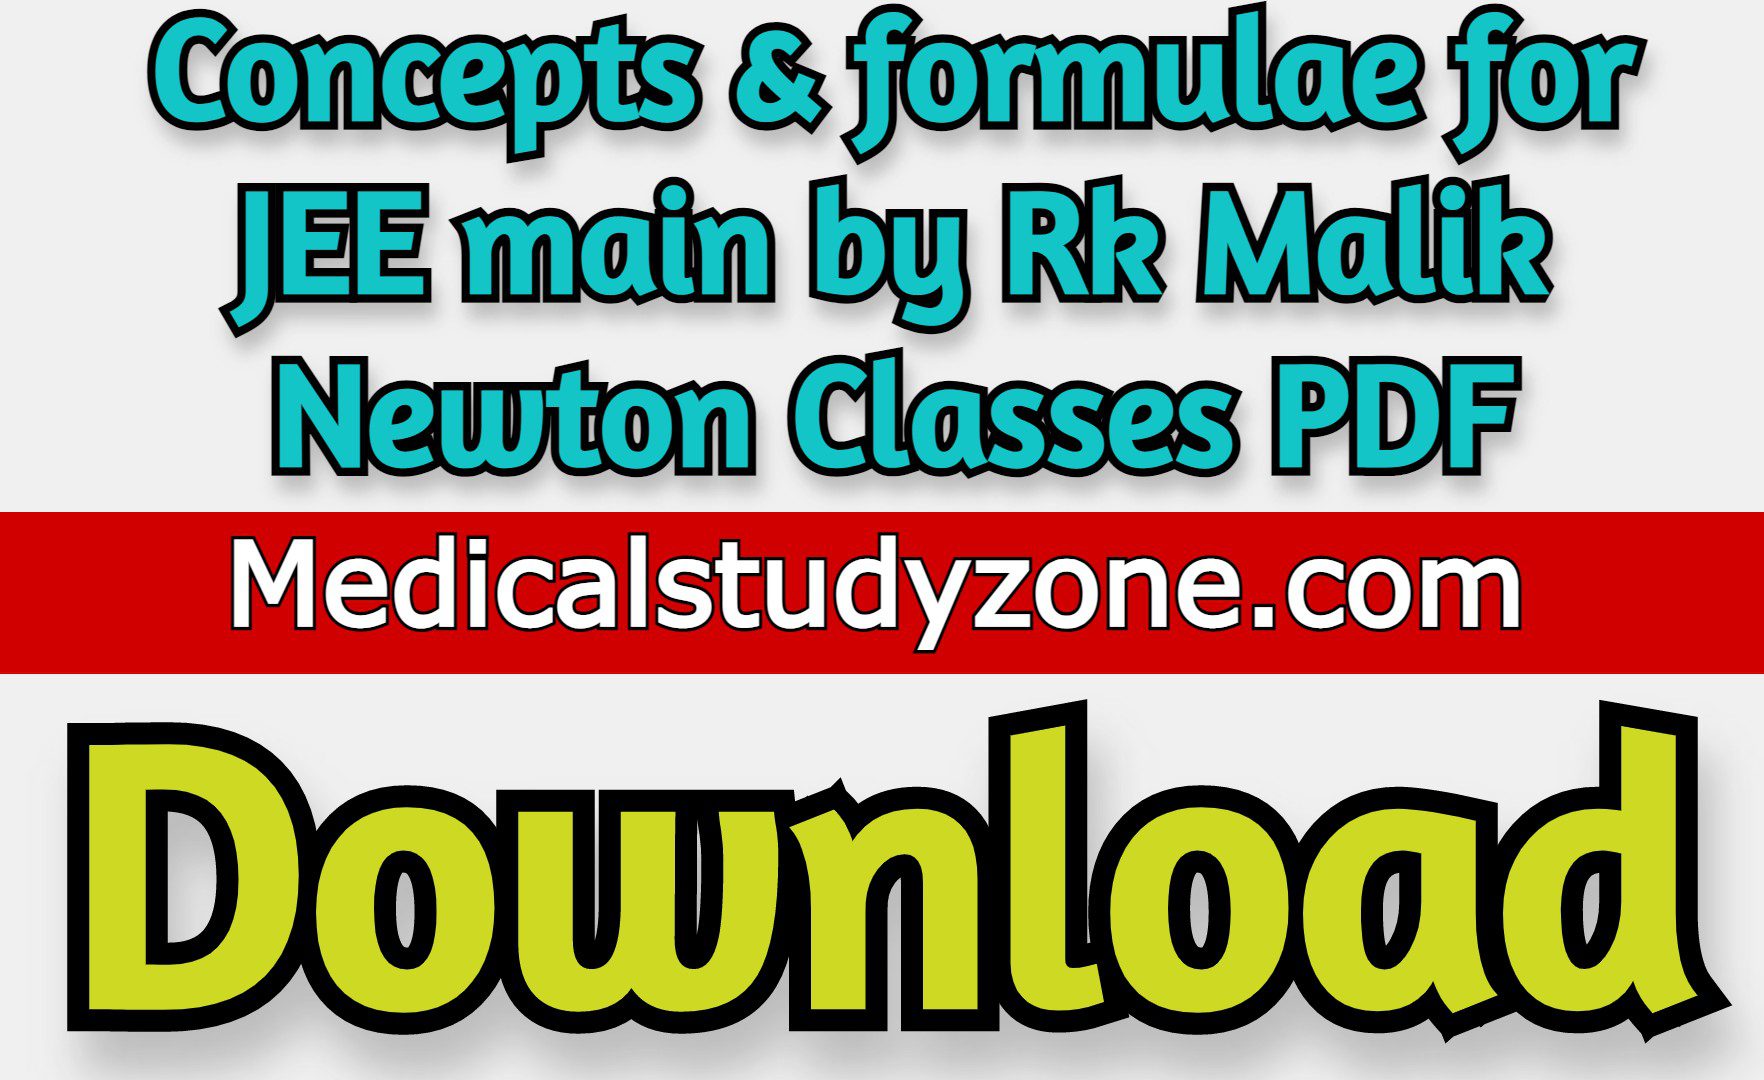 Concepts & formulae for JEE main 2021 by Rk Malik Newton Classes PDF Free Download